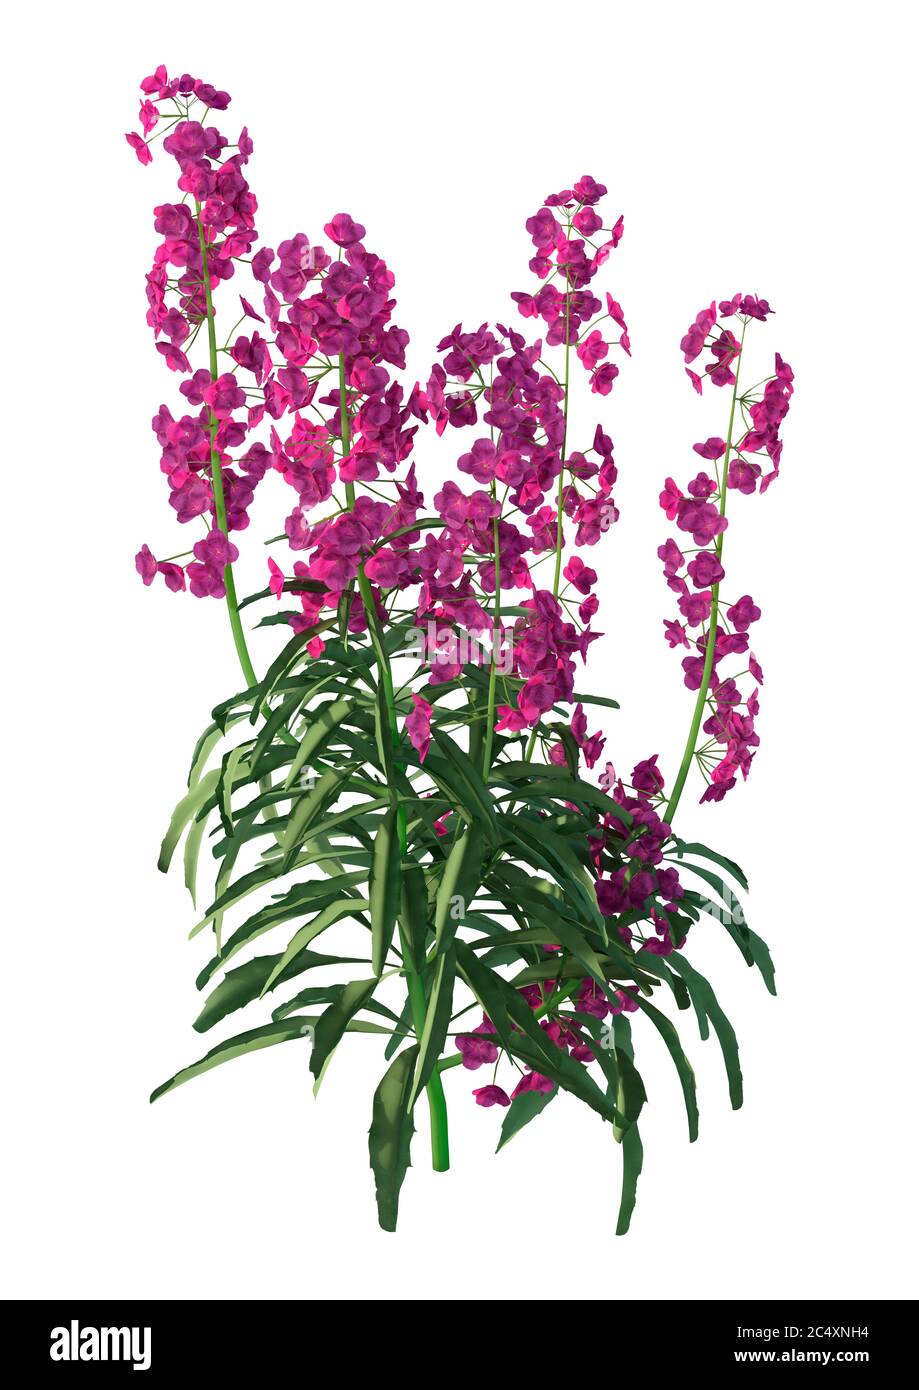 3D rendering of purple blooming wallflower plants isolated on white background Stock Photo